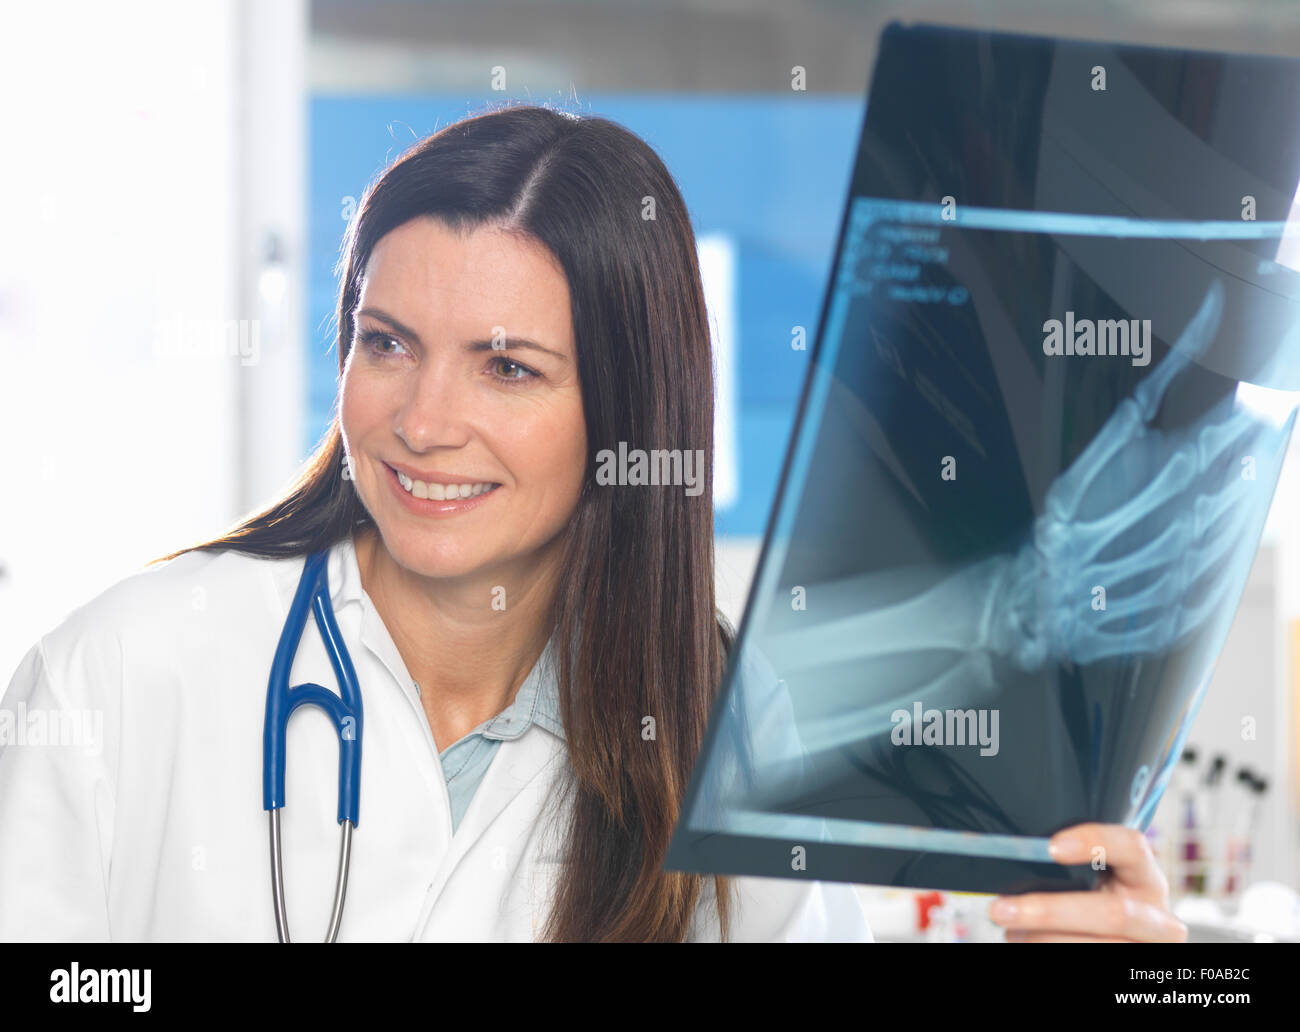 Orthopaedic consultant viewing x-ray of hand Stock Photo